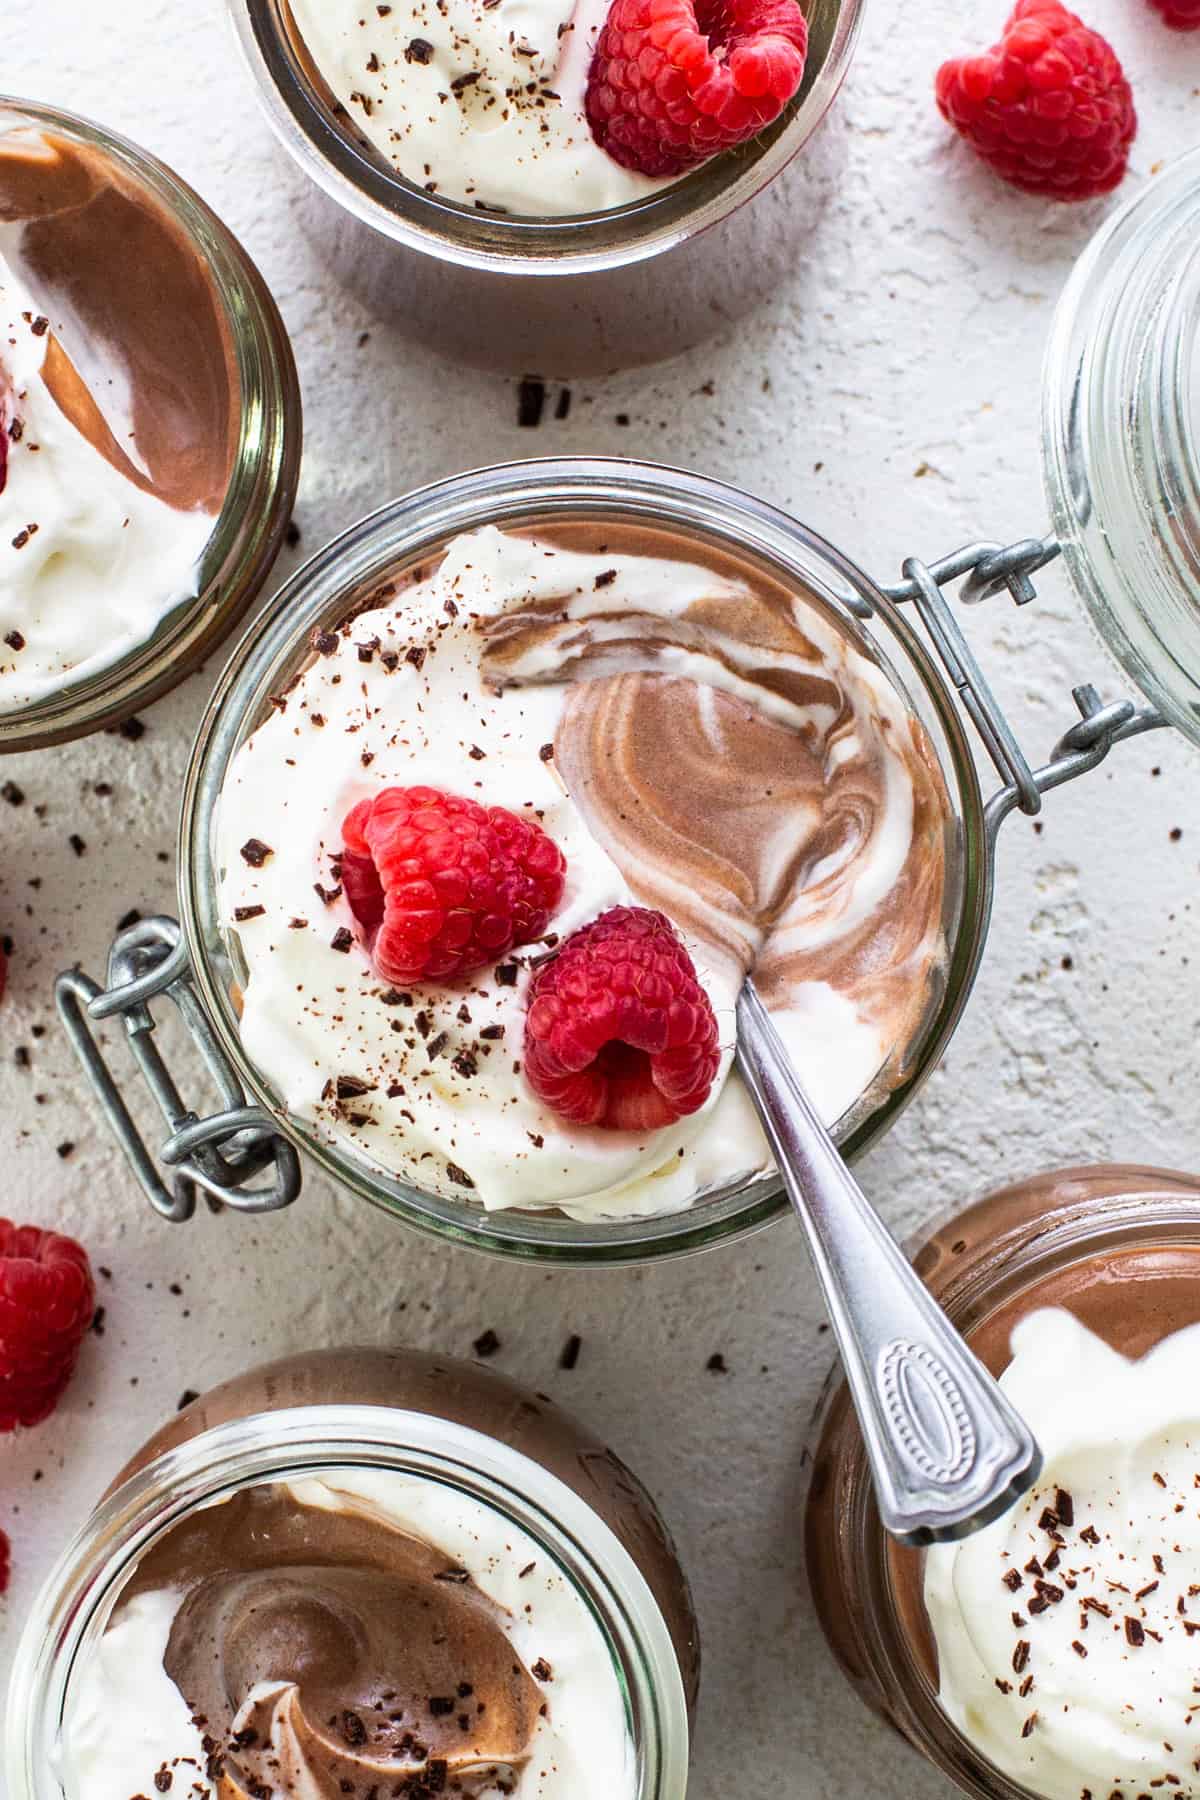 Chocolate mousse in jars with raspberries and whipped cream.